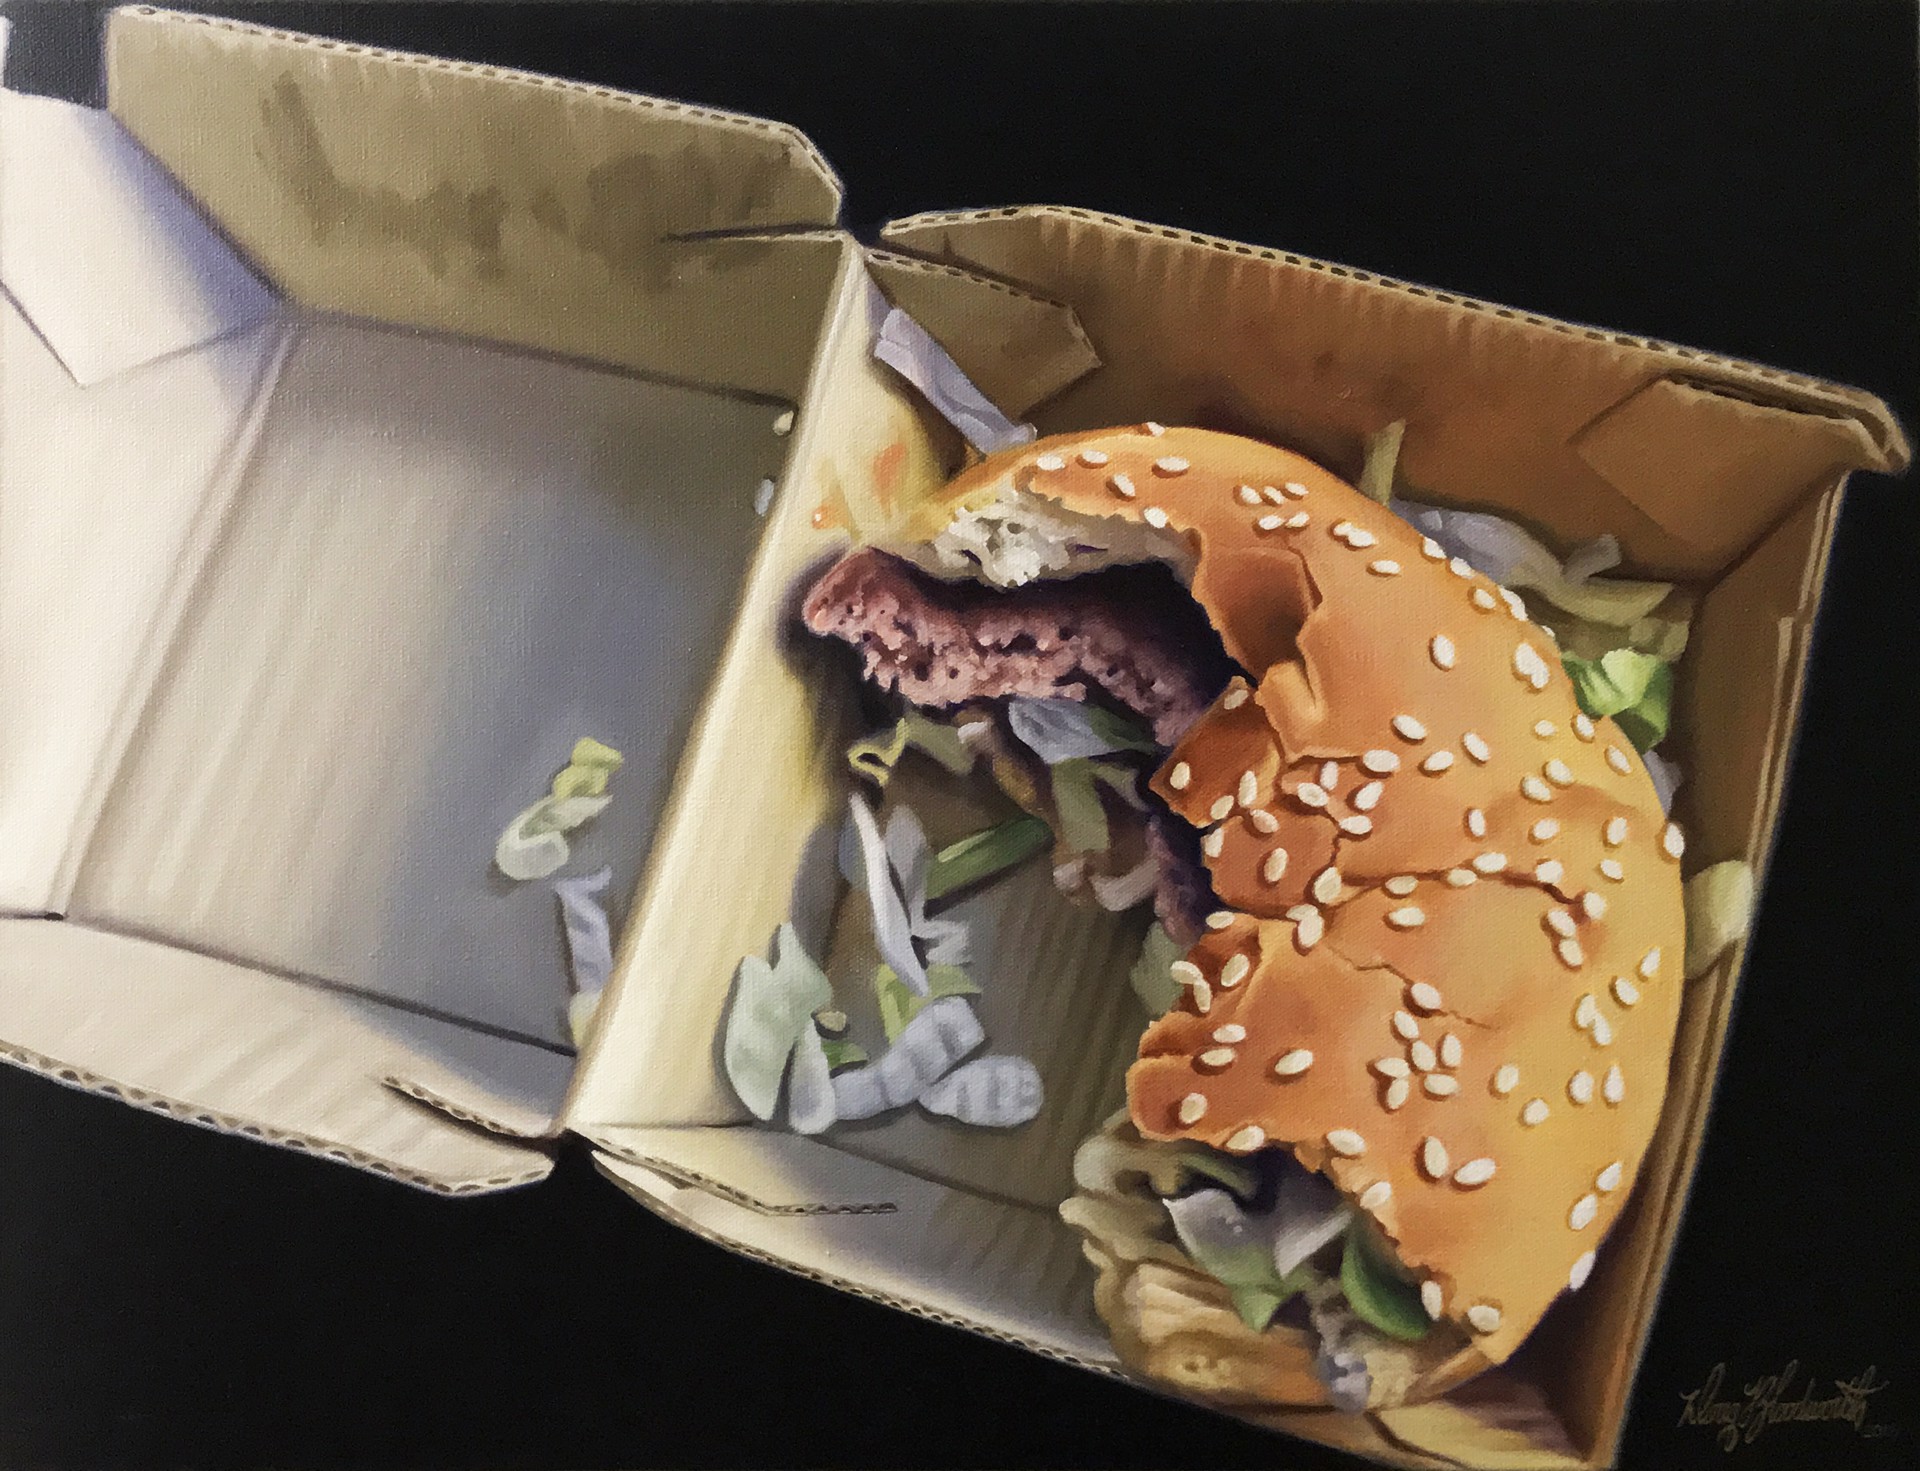 Burger in a Box by Doug Bloodworth